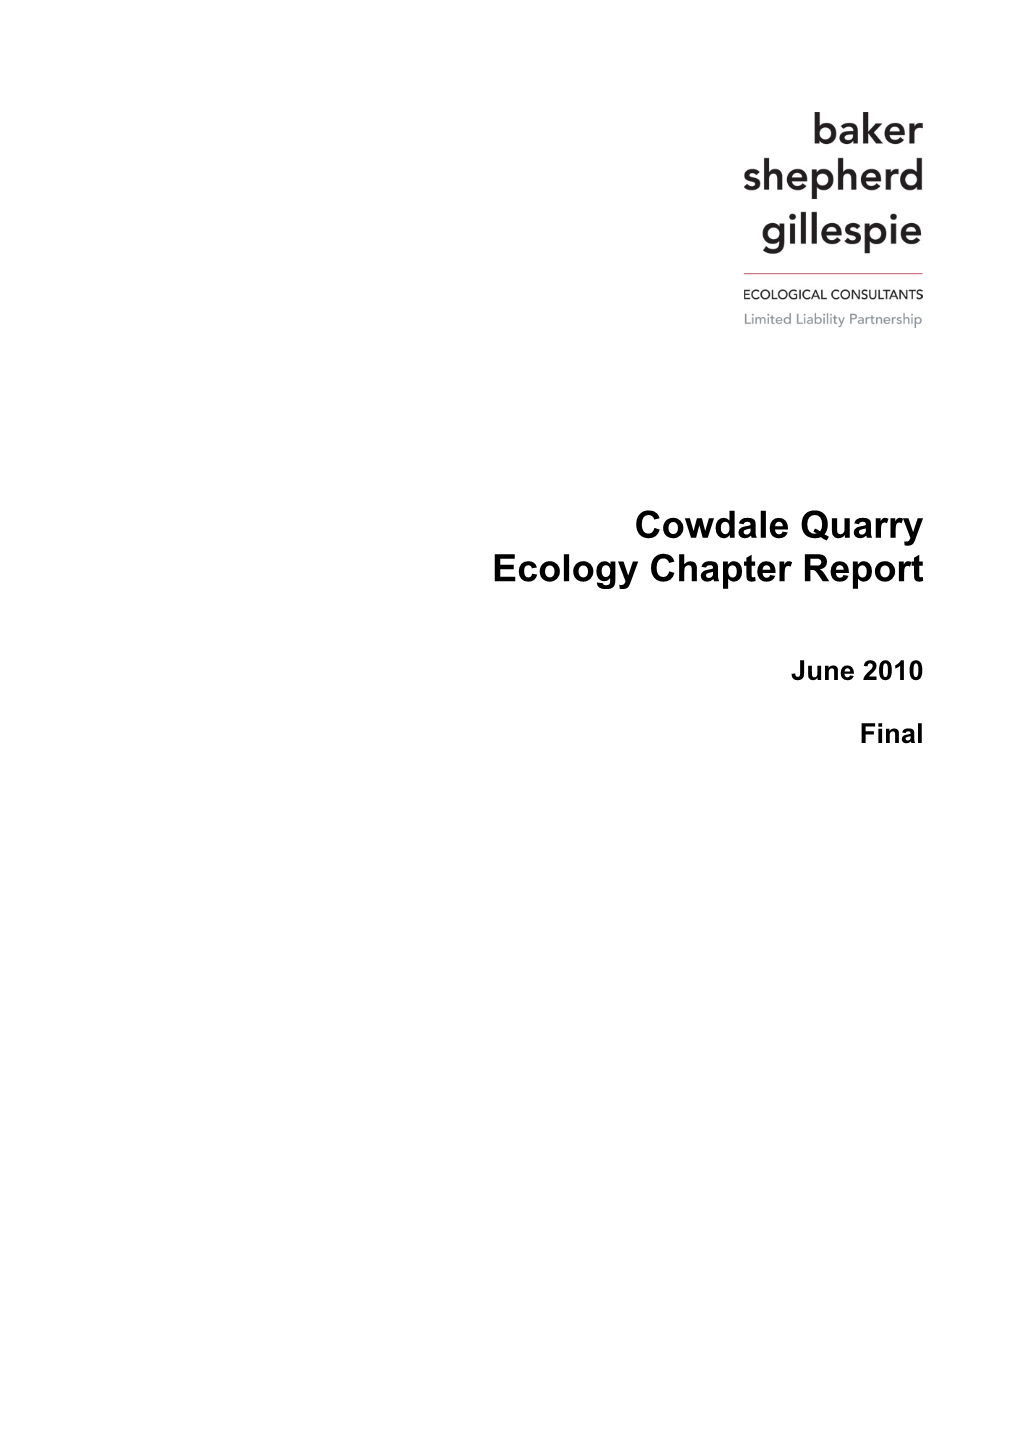 Cowdale Quarry Ecology Chapter Report